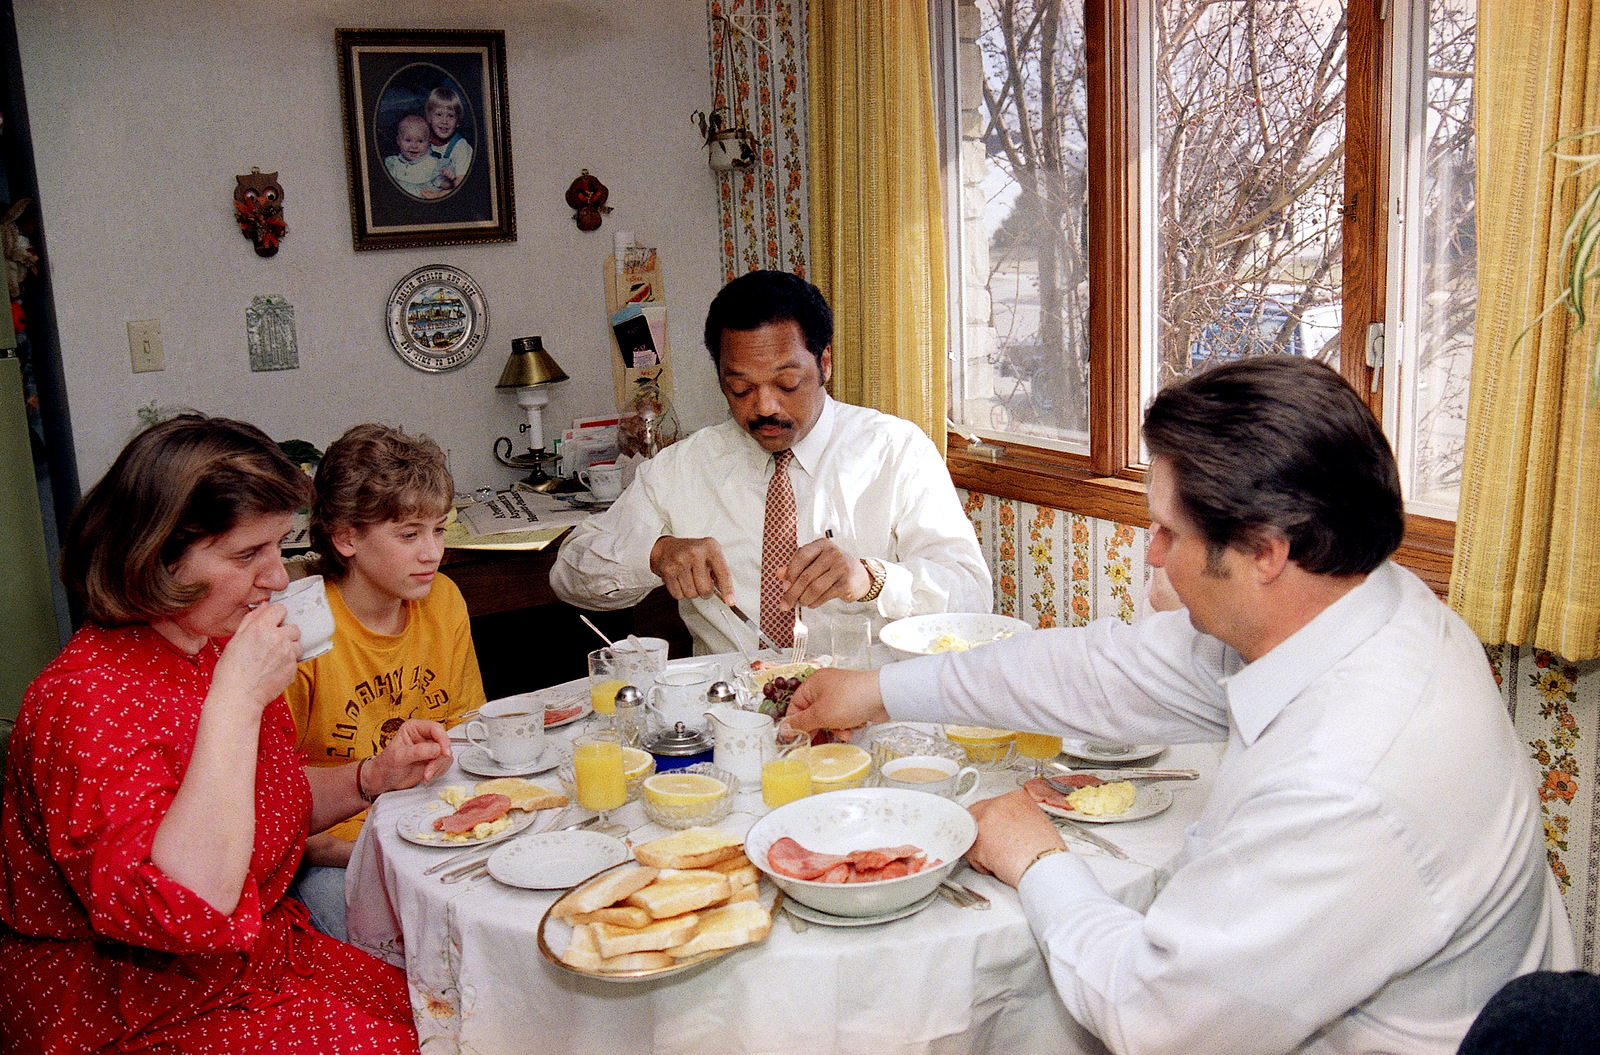 Presidential candidate Jesse Jackson joins the Becker family for breakfast after spending the night in their home in Cudahy, Wis. in 1988. (AP/Ron Rdmonds)